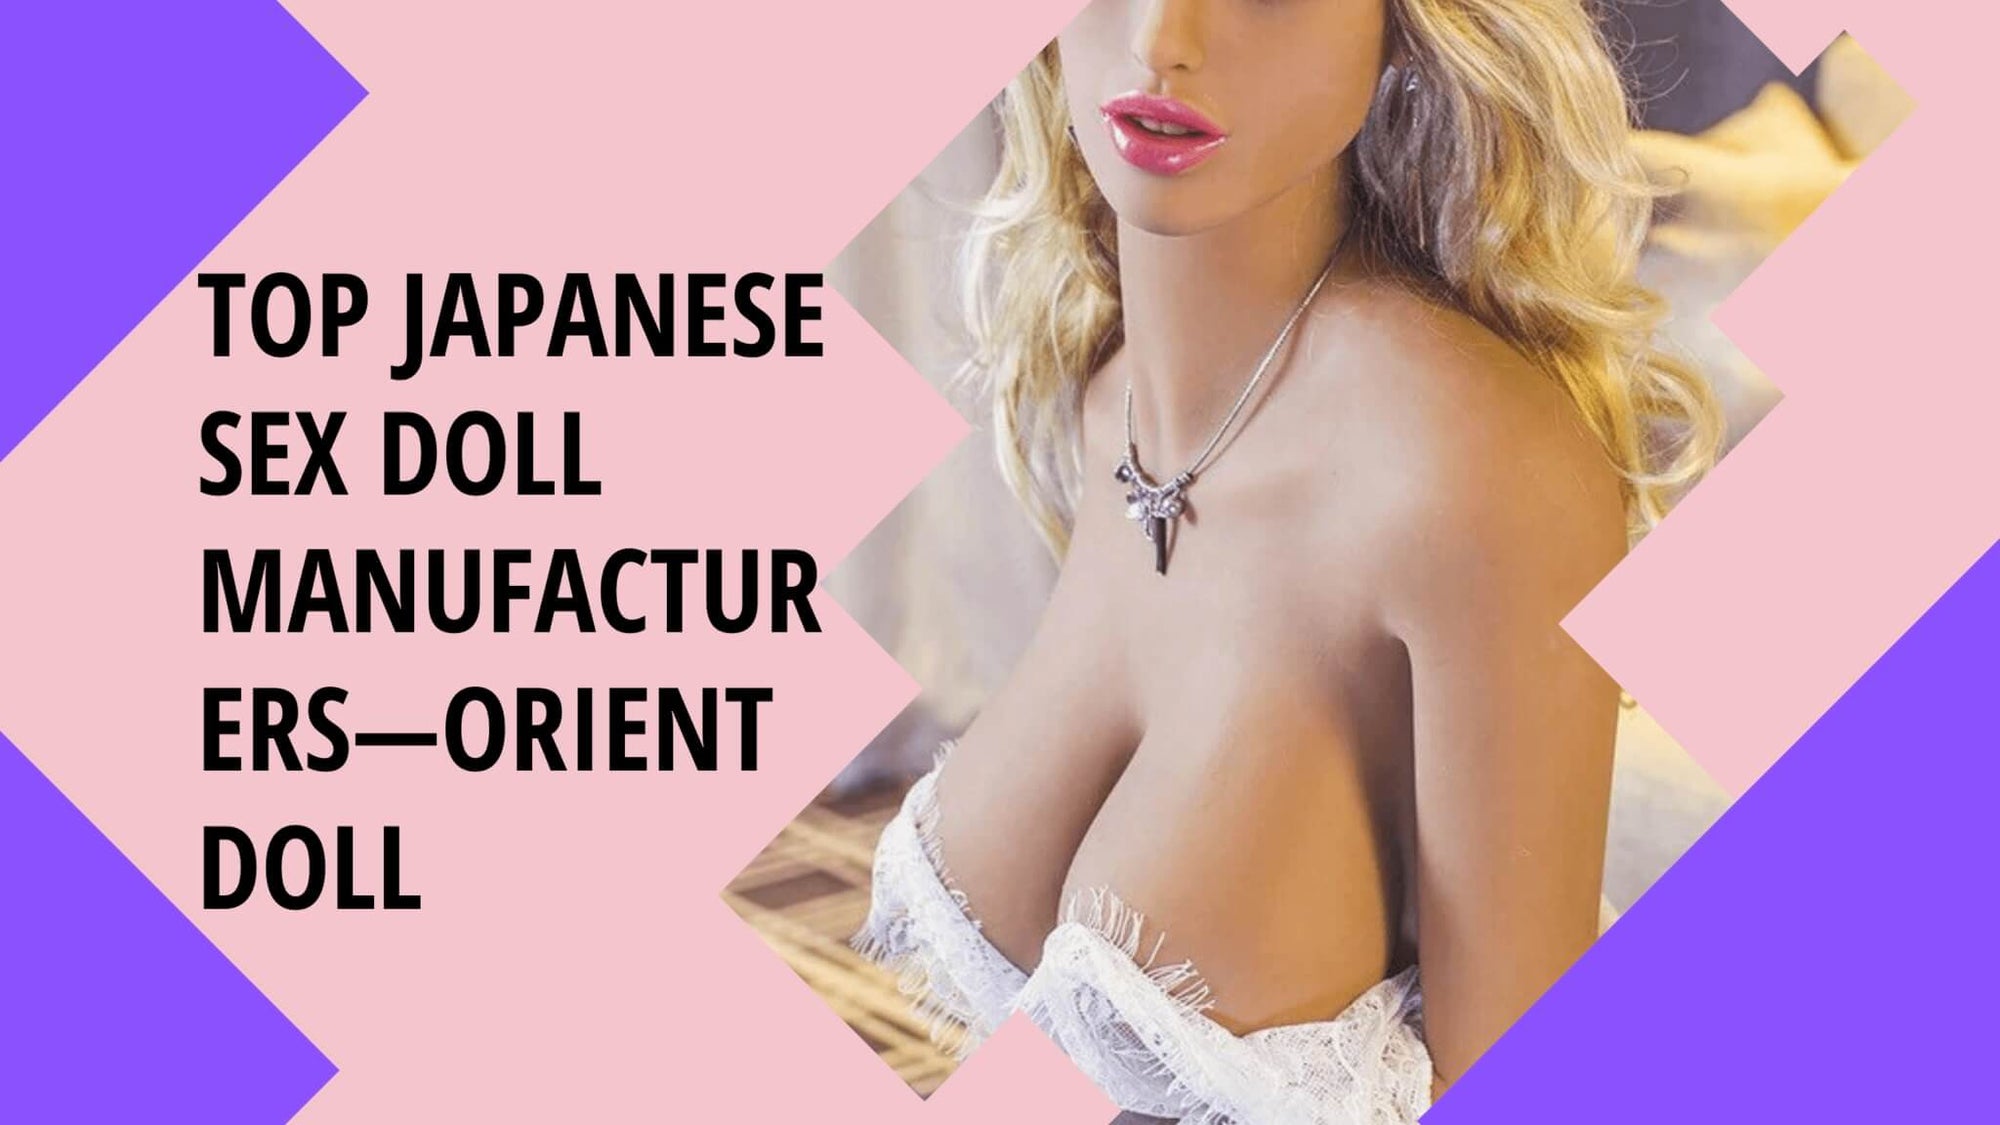 Top Japanese Sex Doll Manufacturer - Orient Doll